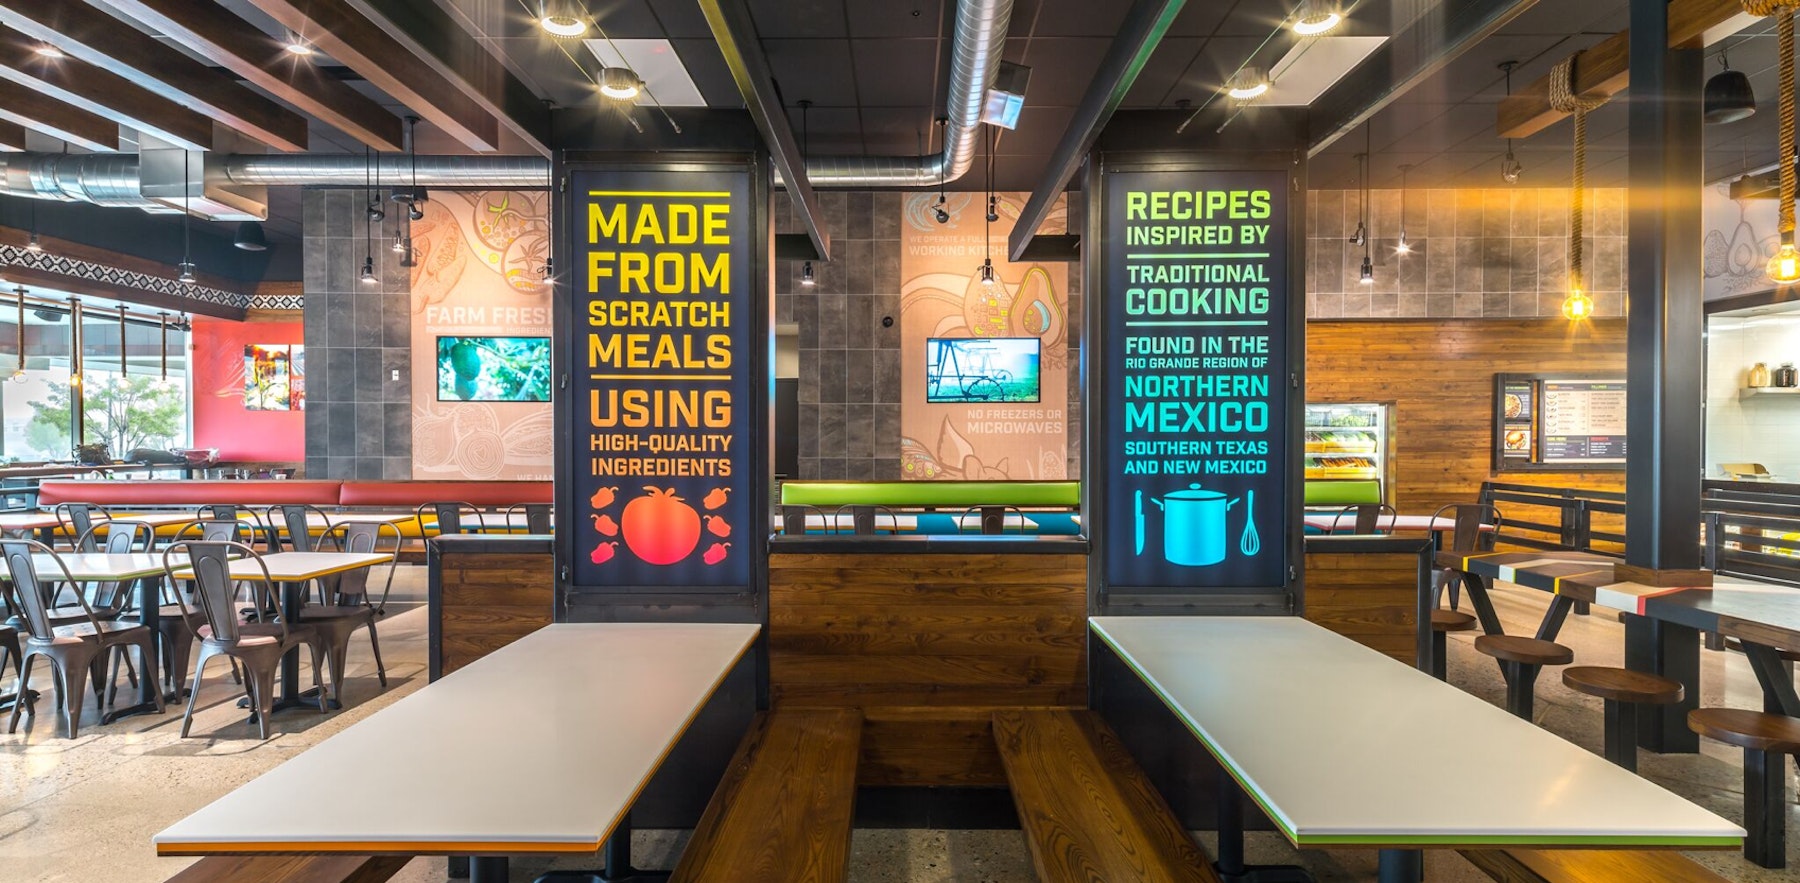 Cafe Rio Mexican Grill | Digital Experience Case Study | Union